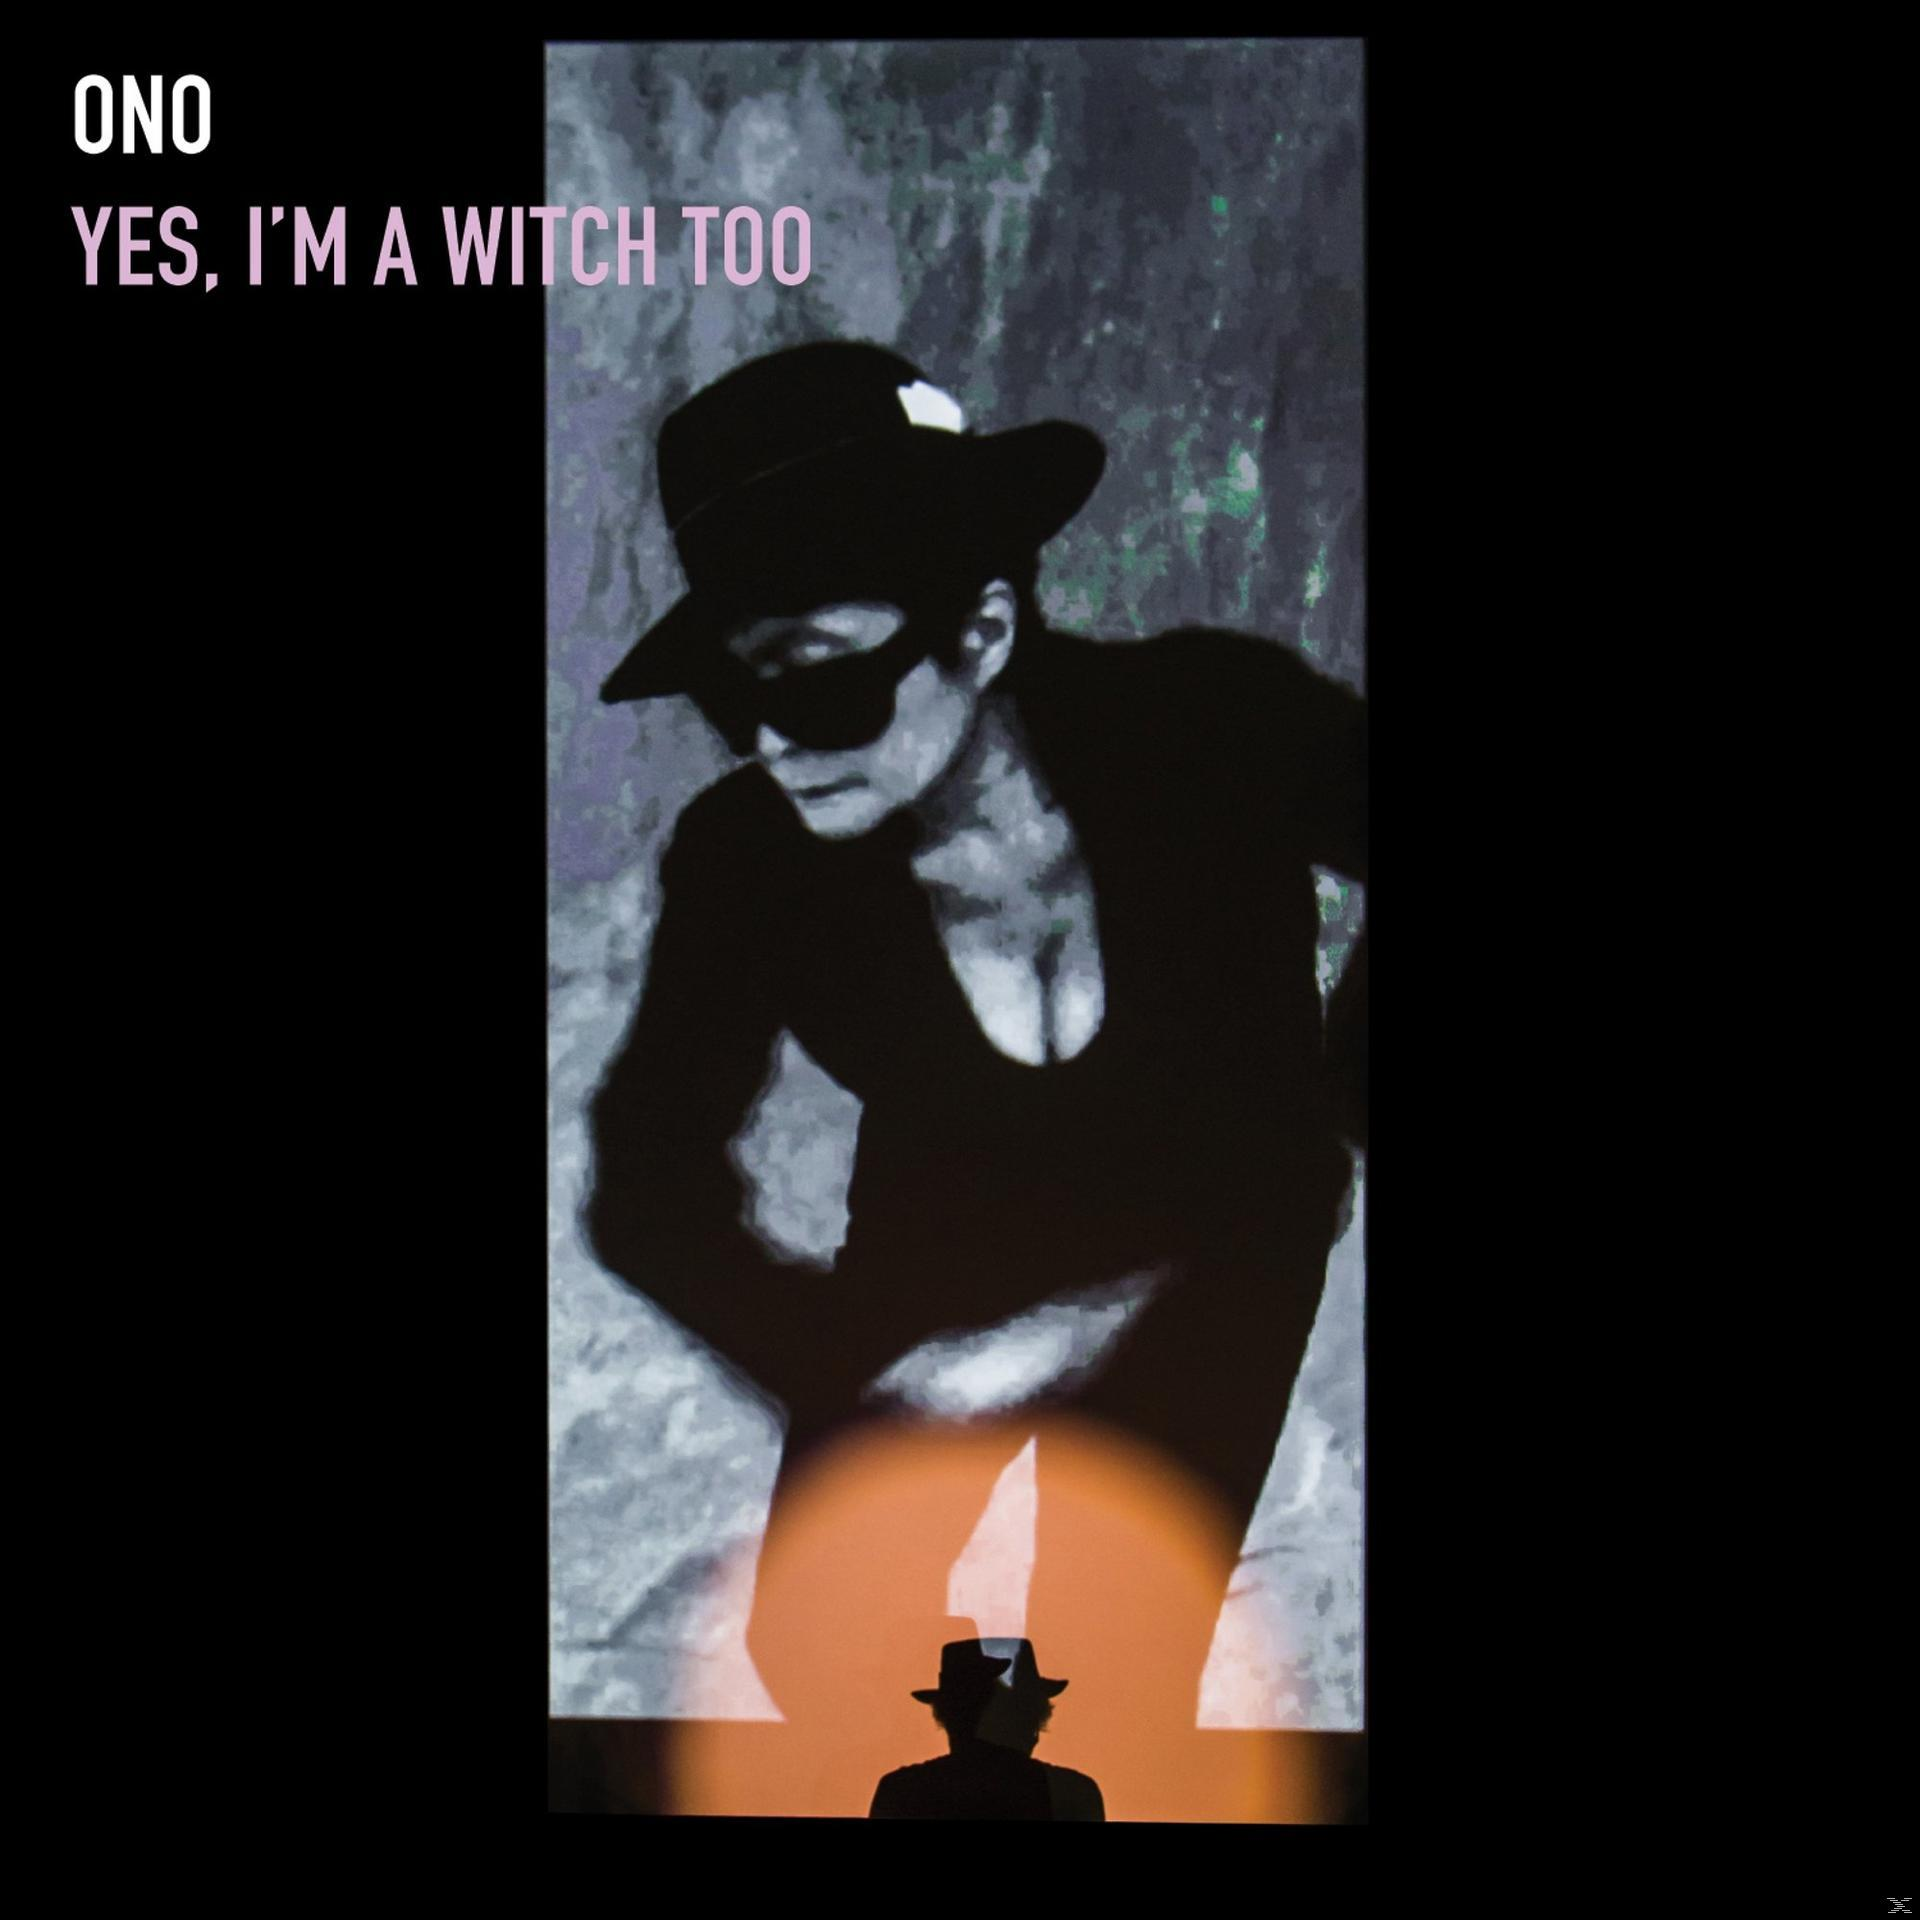 Yoko Ono, VARIOUS Too Yes, Witch A I\'m - (Vinyl) (2lp) 